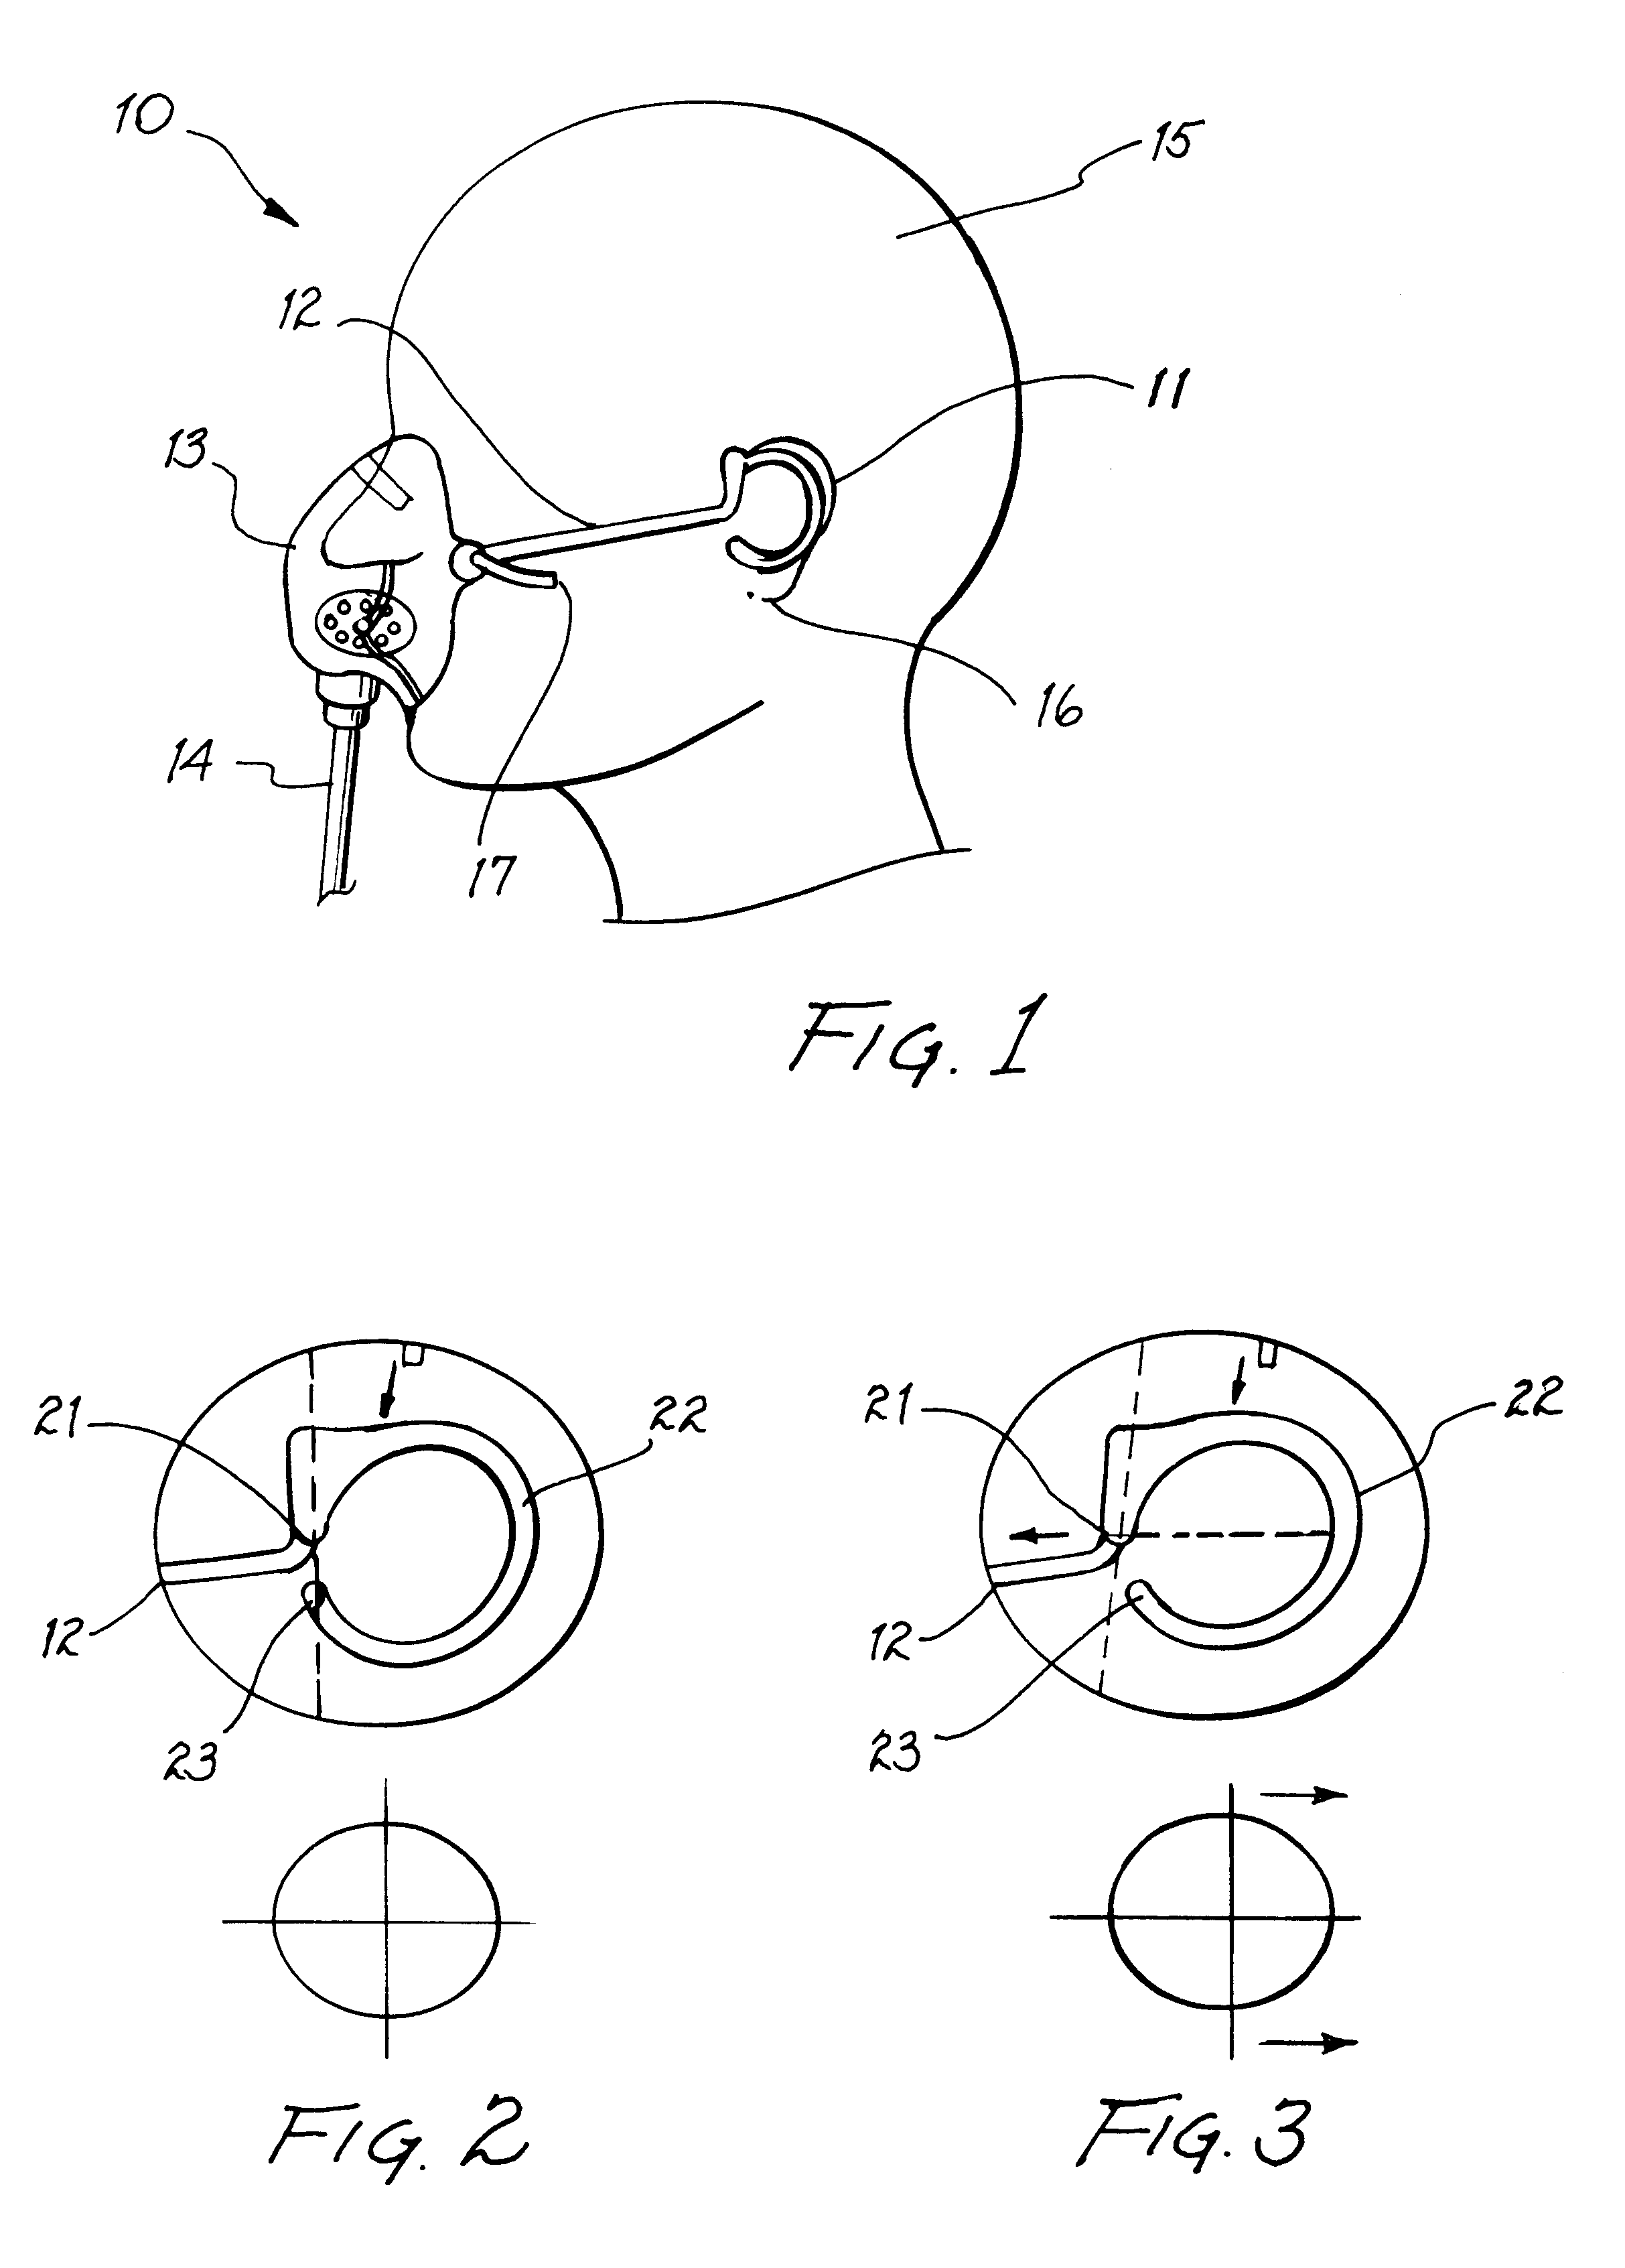 Oxygen mask retention device and method for retaining an oxygen mask